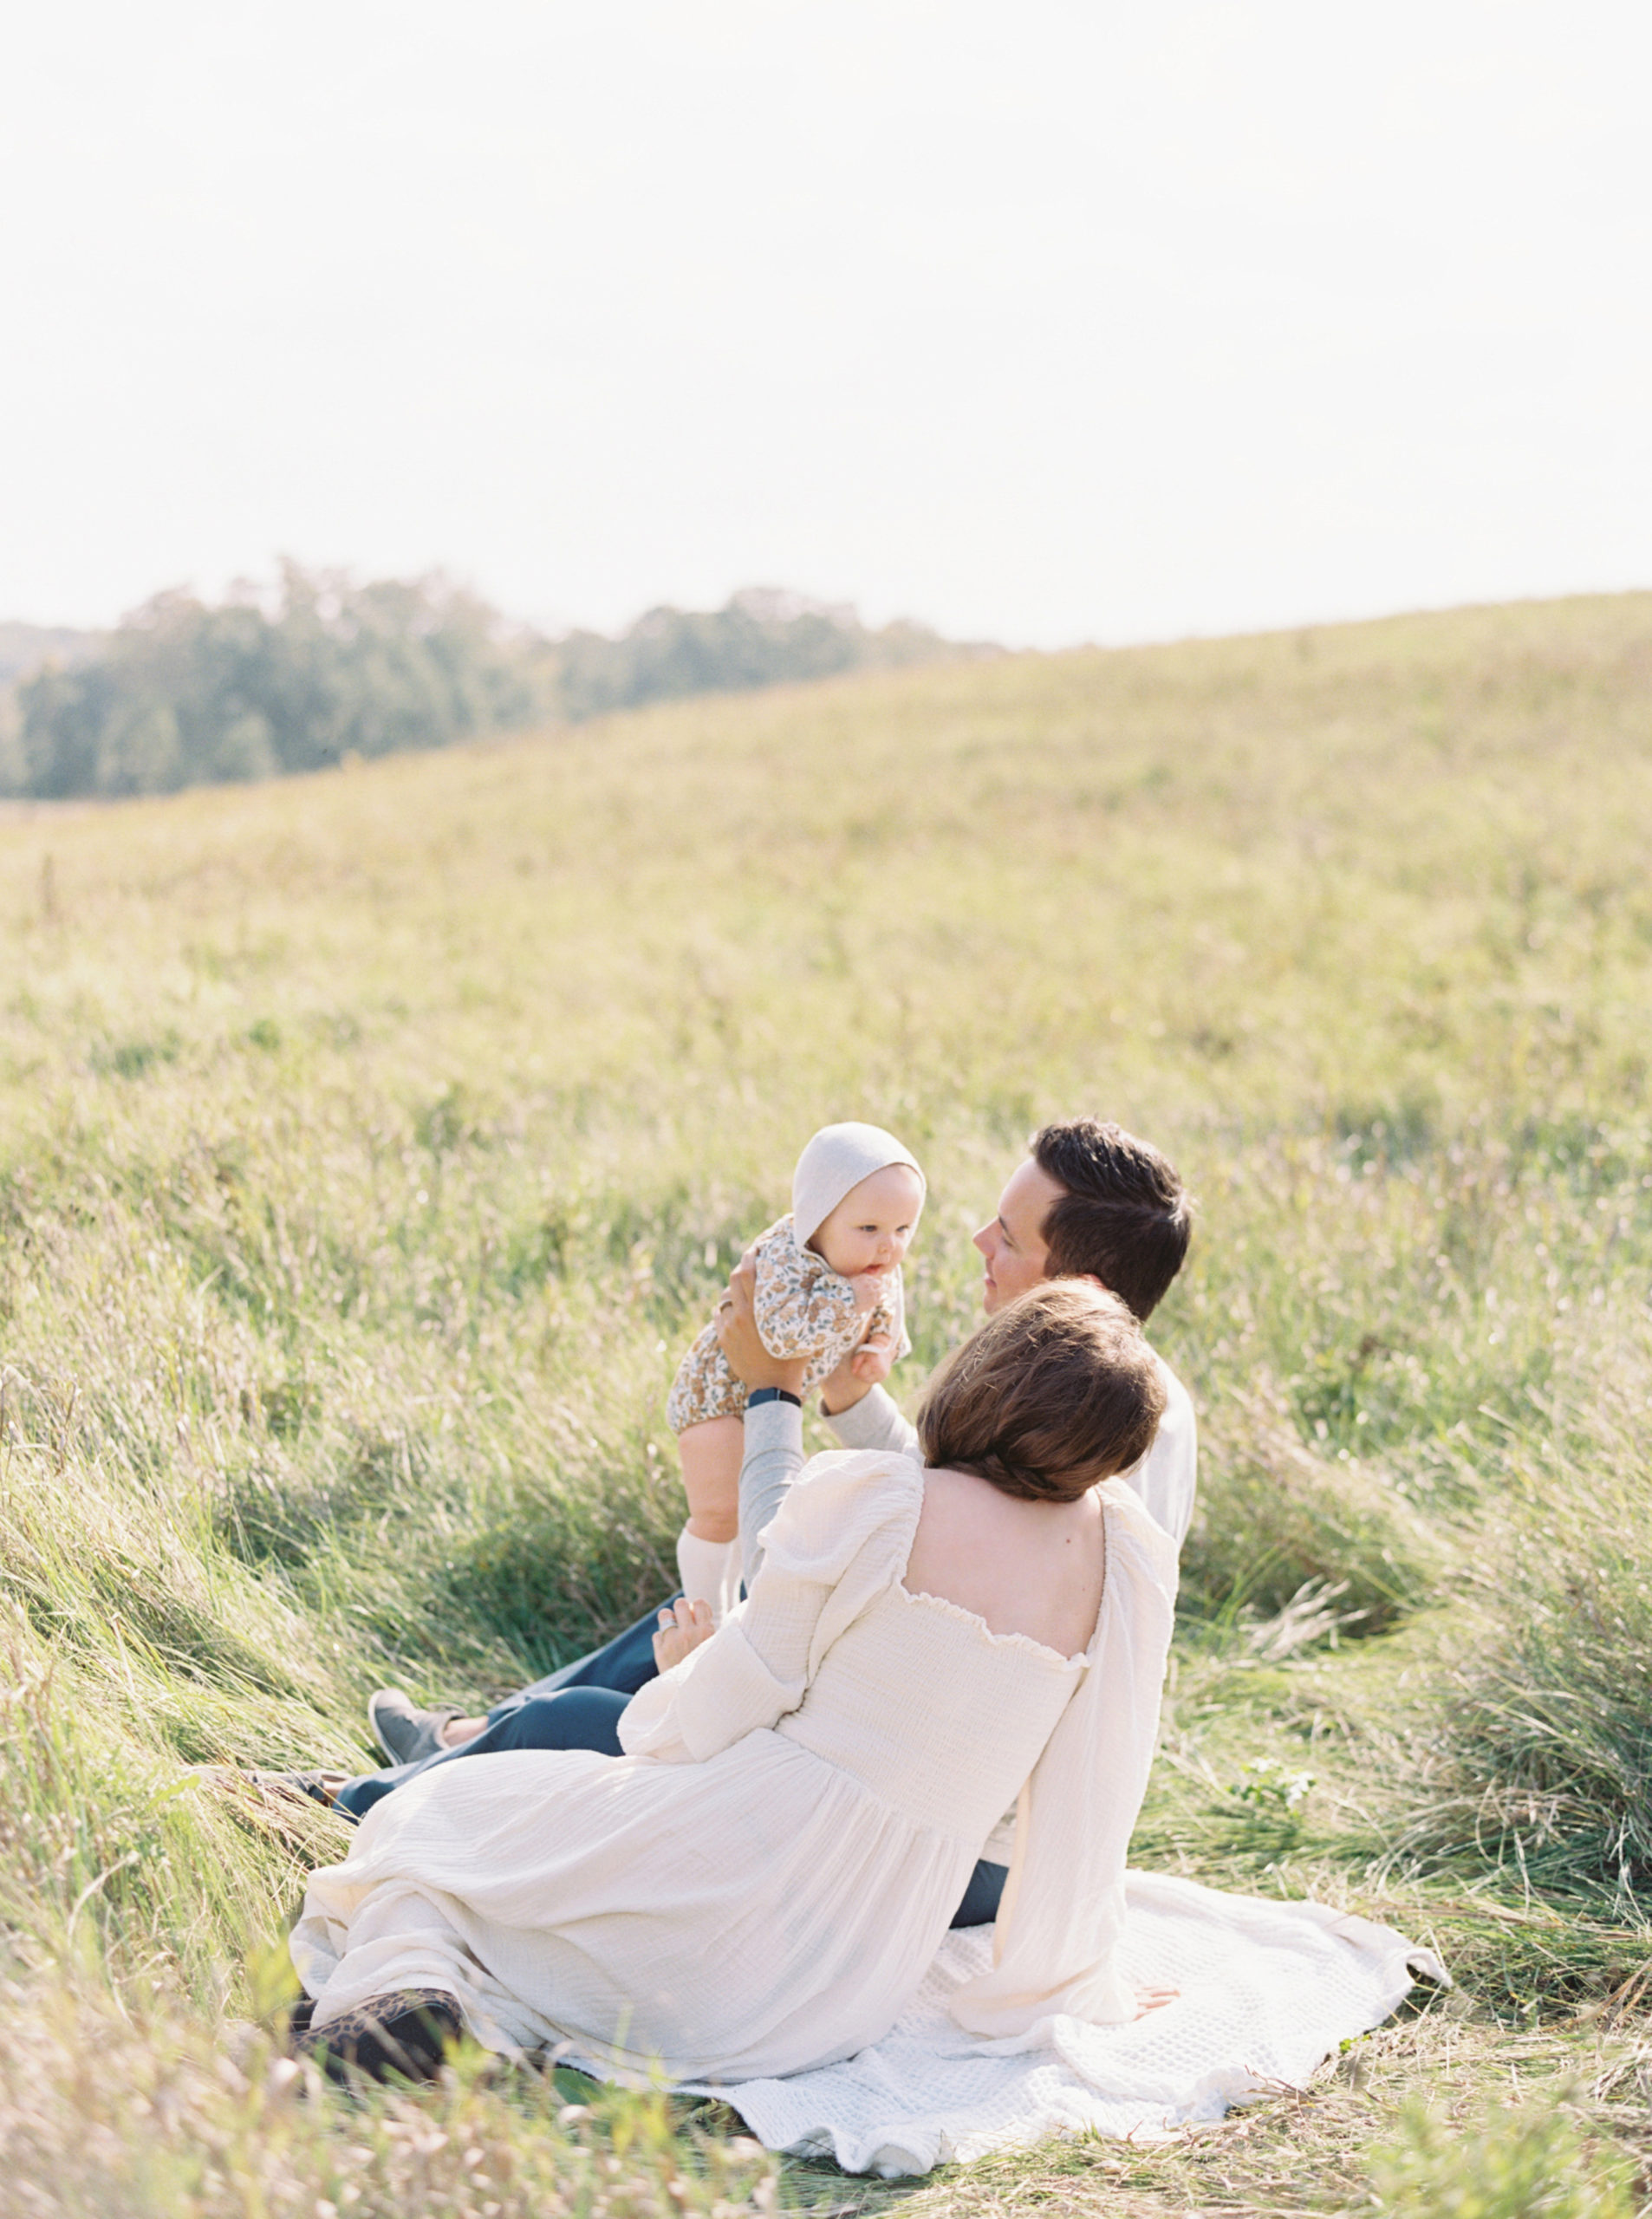 A mother and father cuddle their baby in a grassy Hartland field on a beautiful Fall afternoon